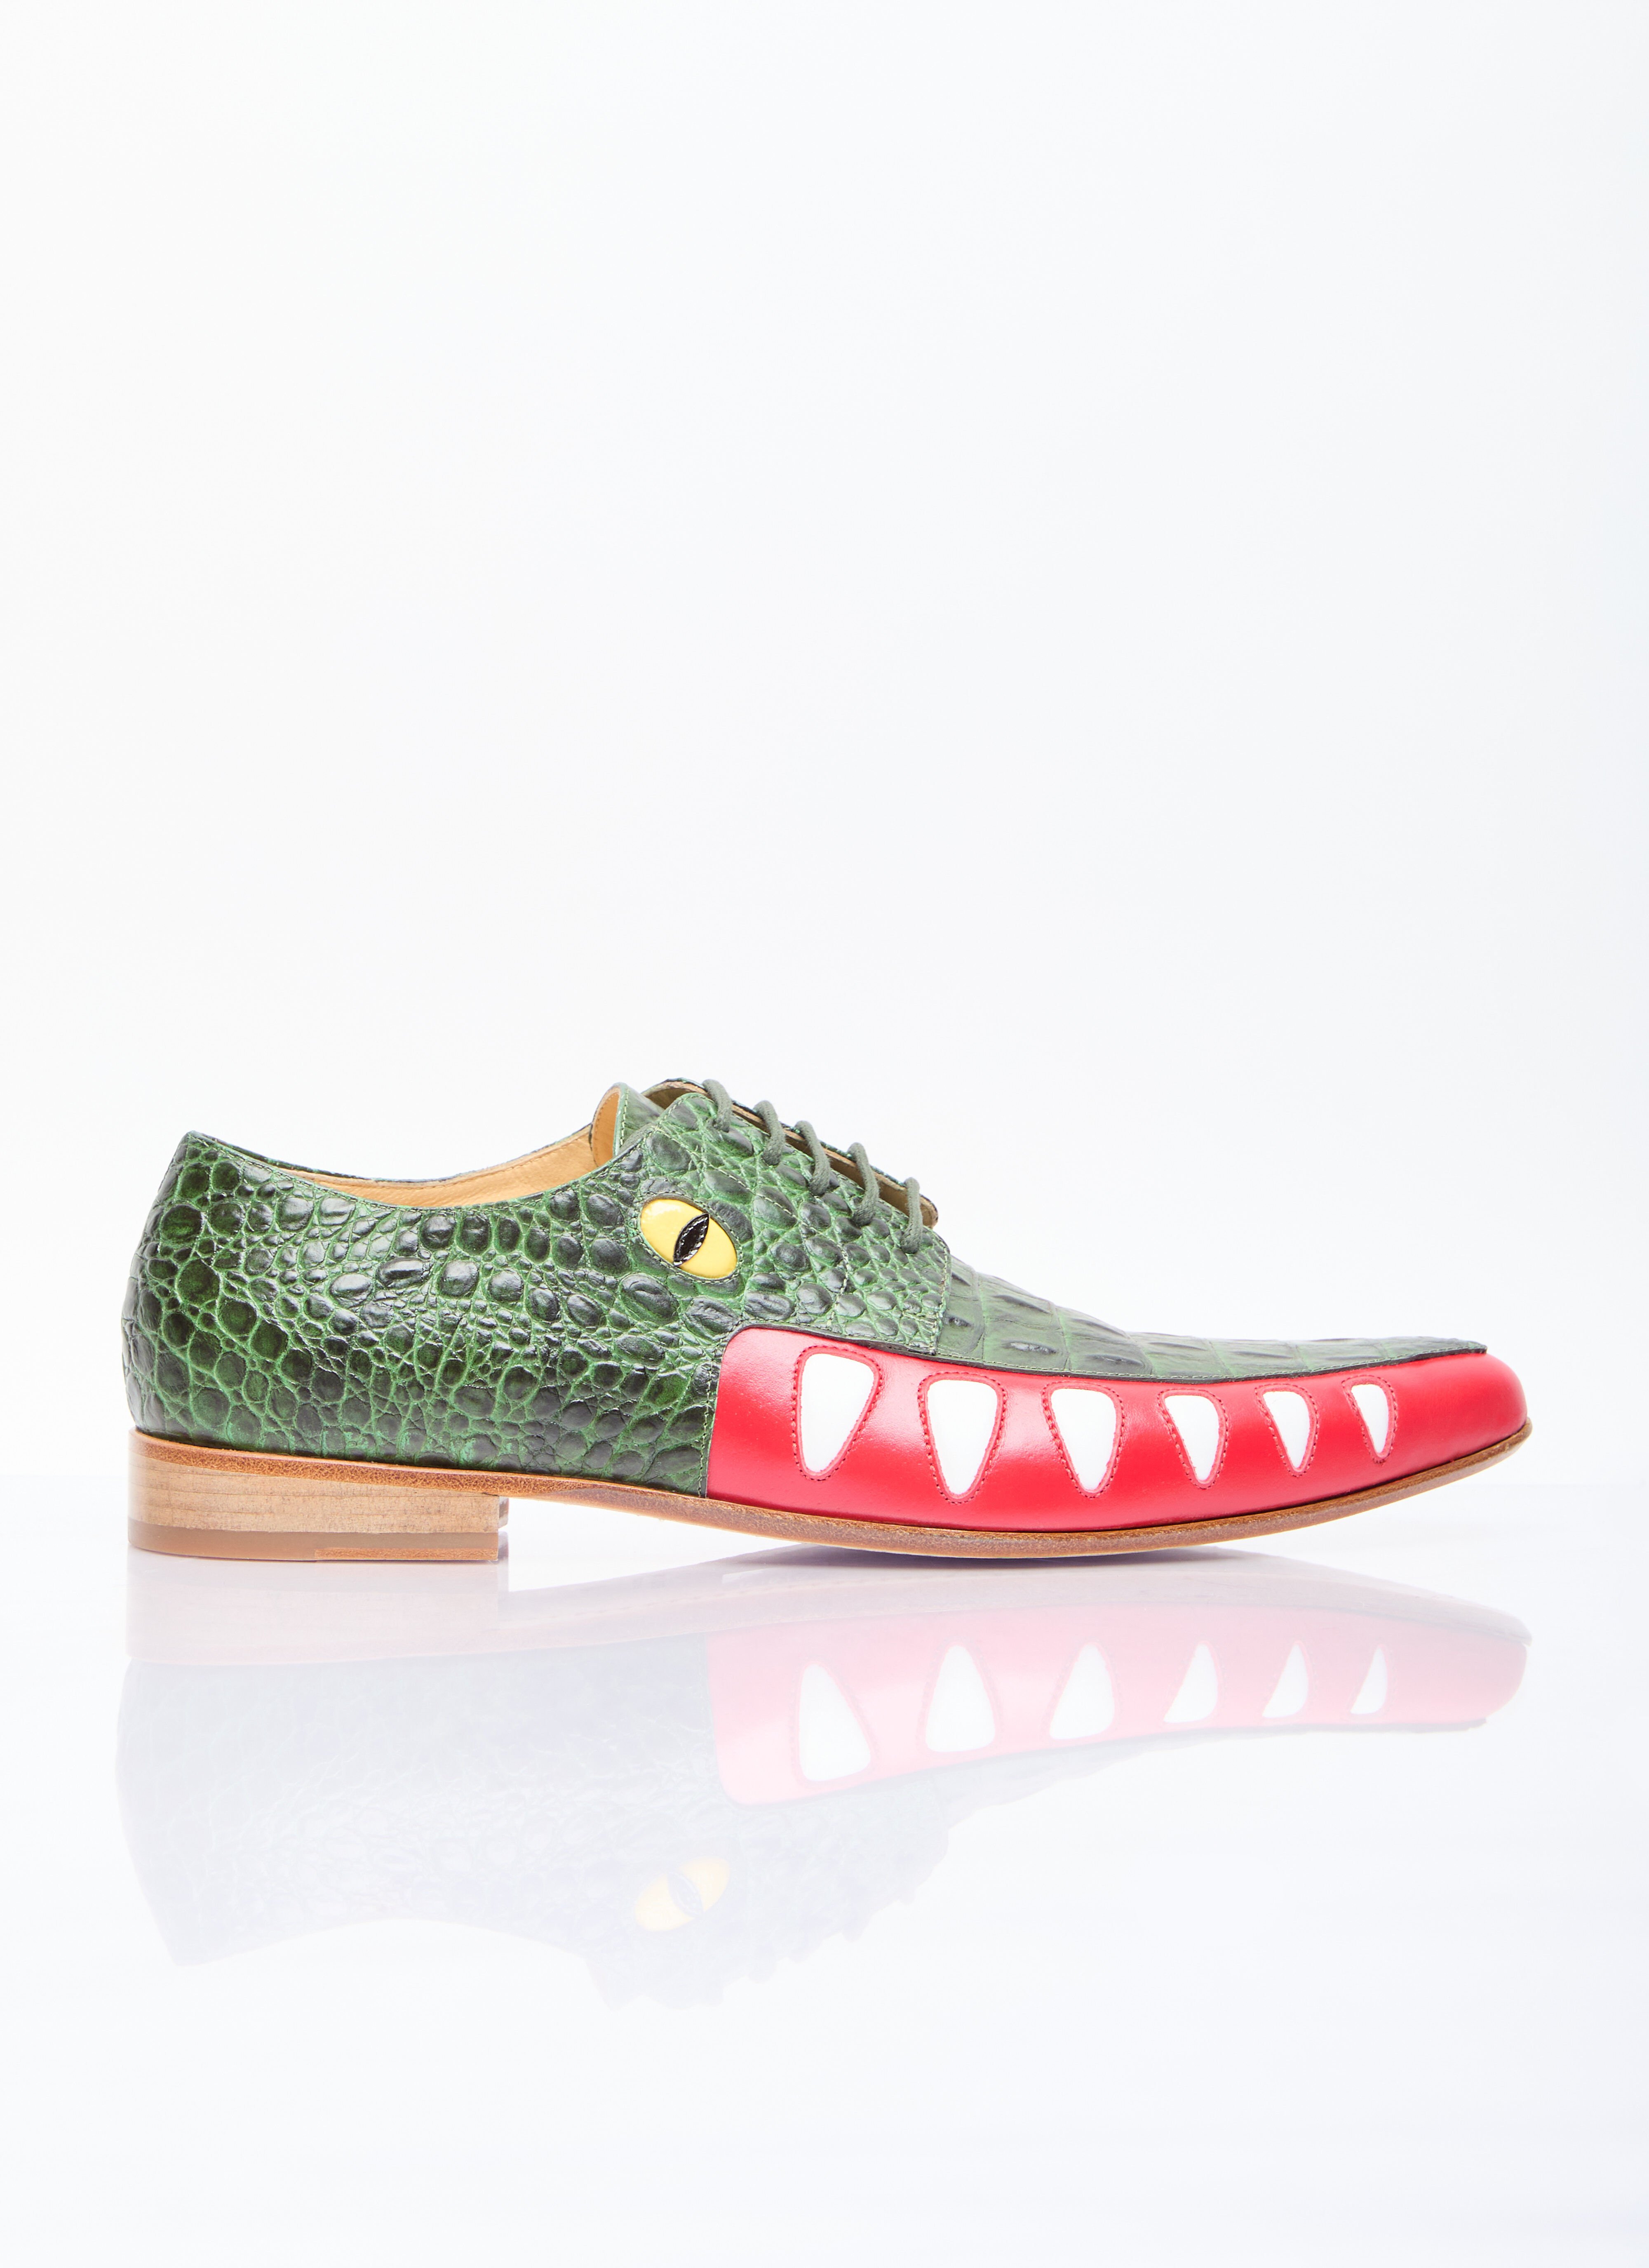 Walter Van Beirendonck Crocodile Lace-Up Shoes White wlt0156015